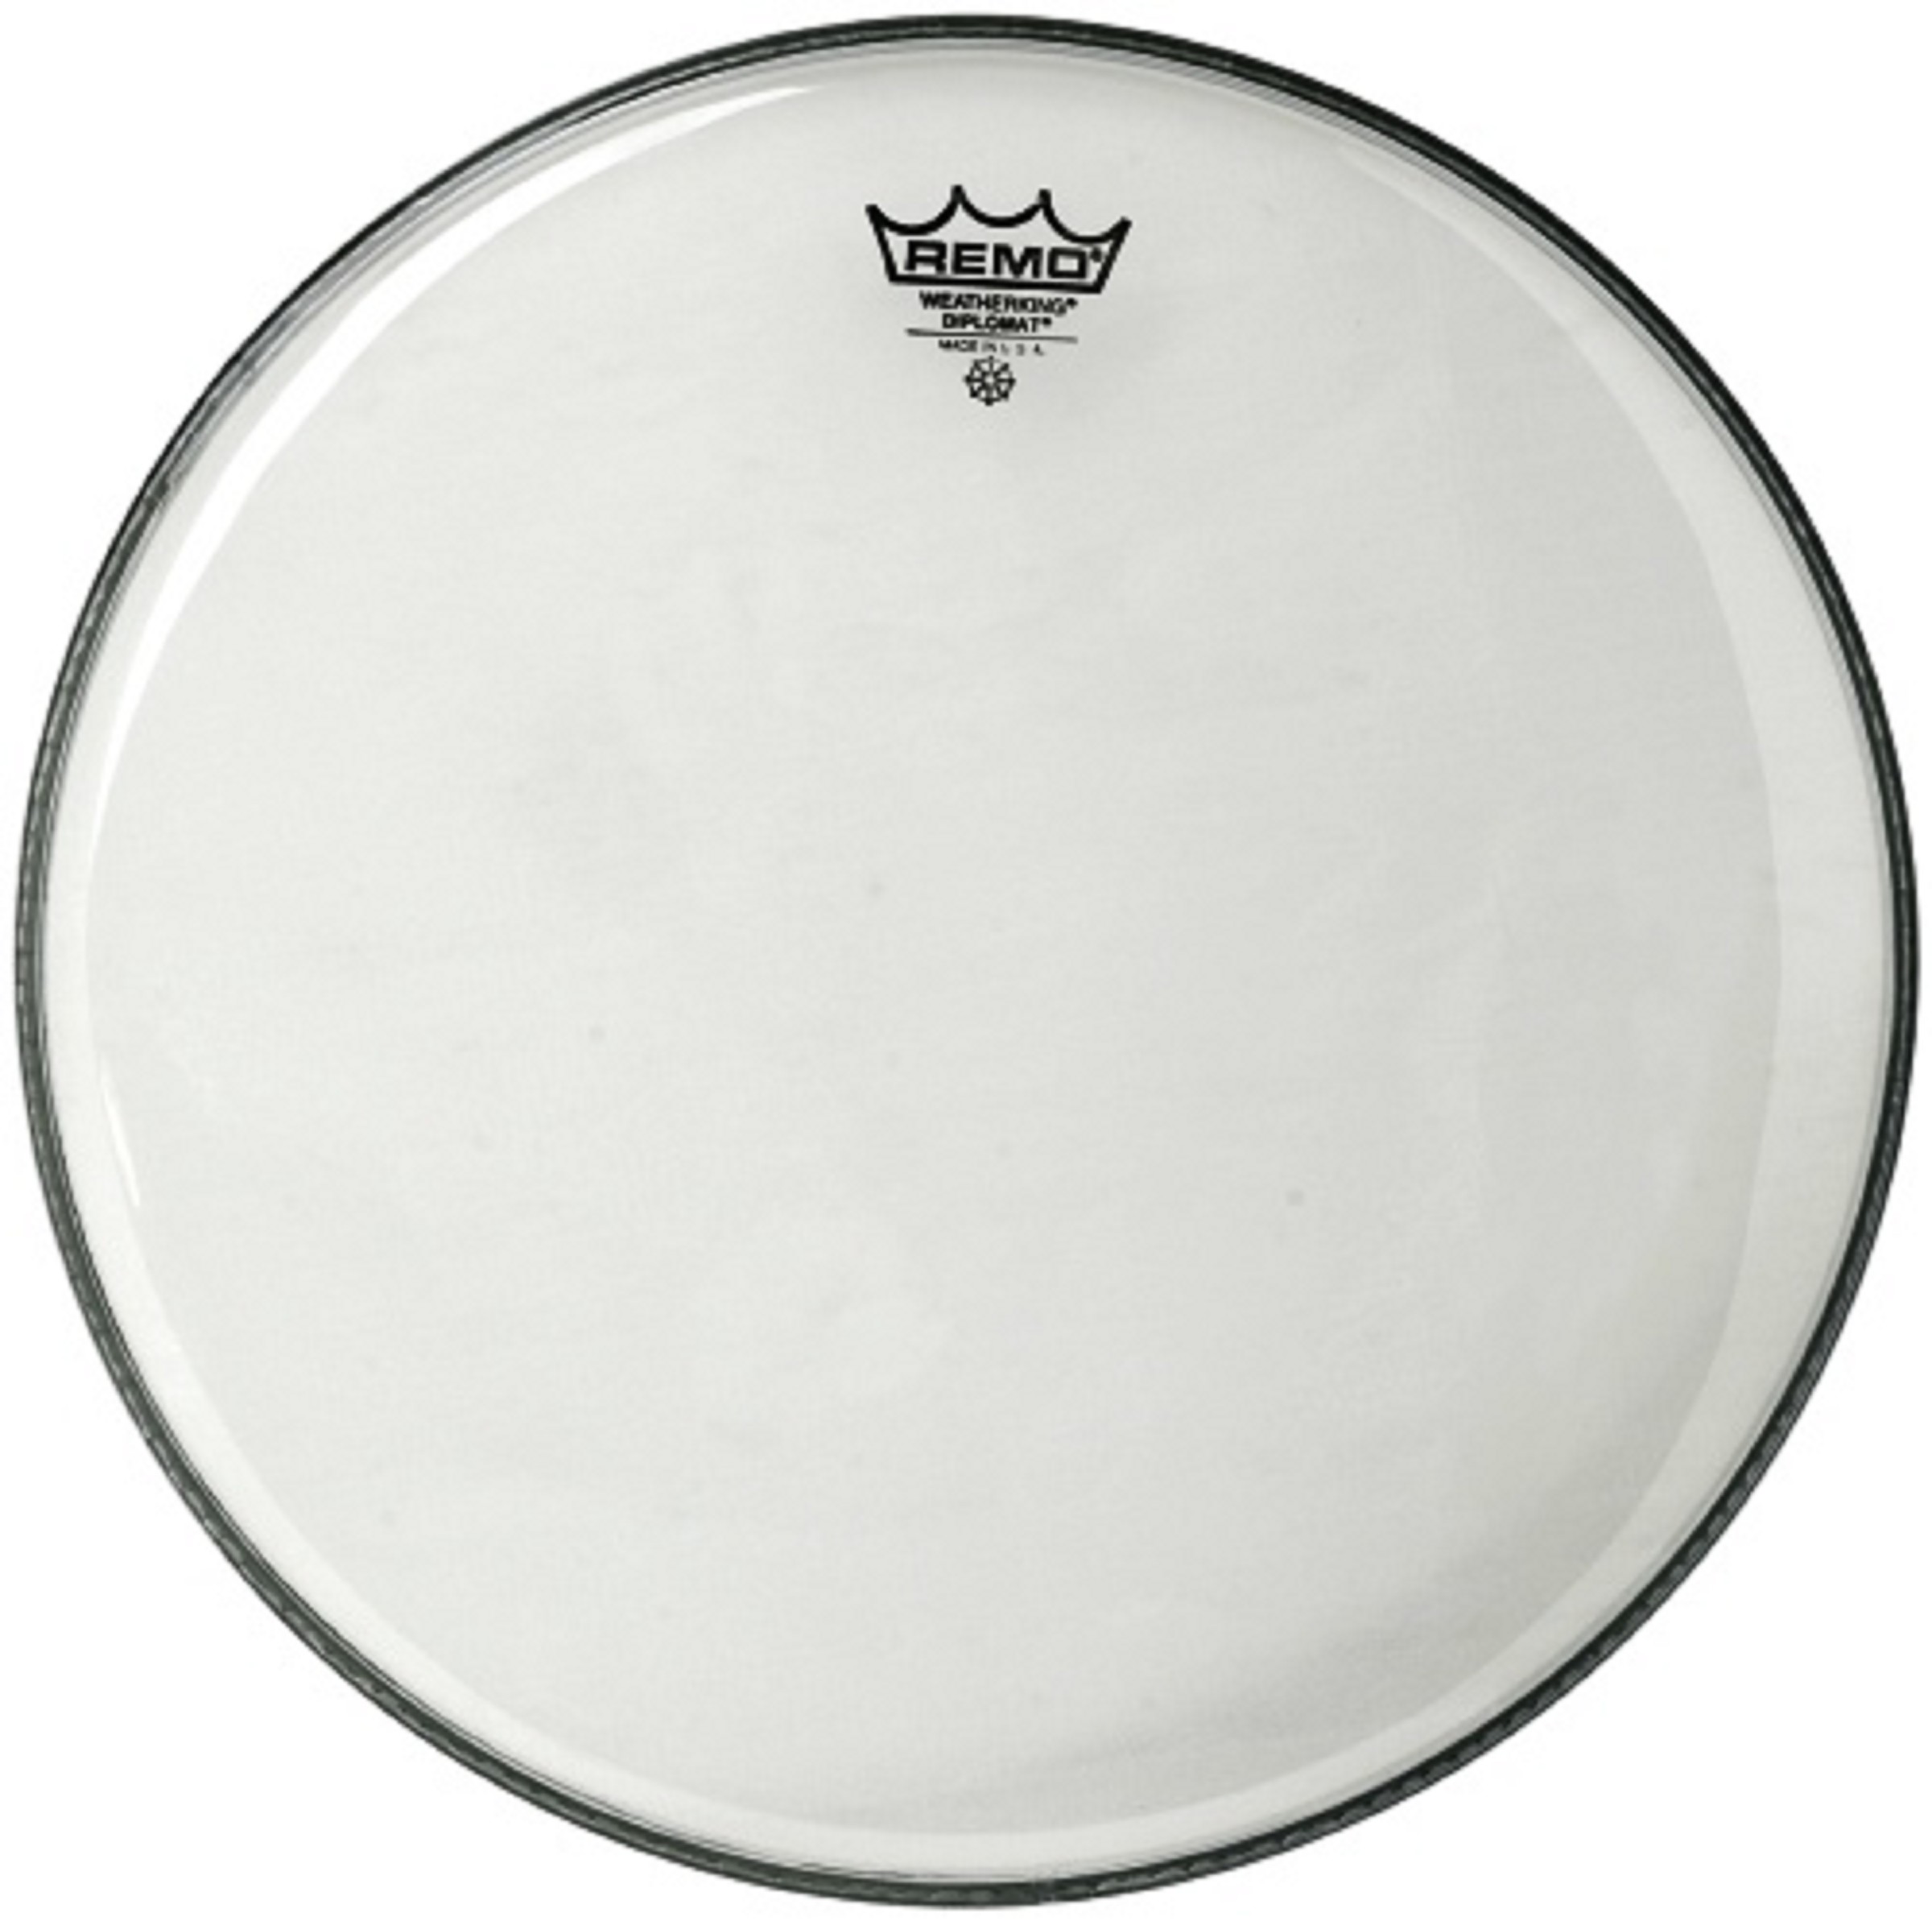 Remo Fell Diplomat 12" Clear